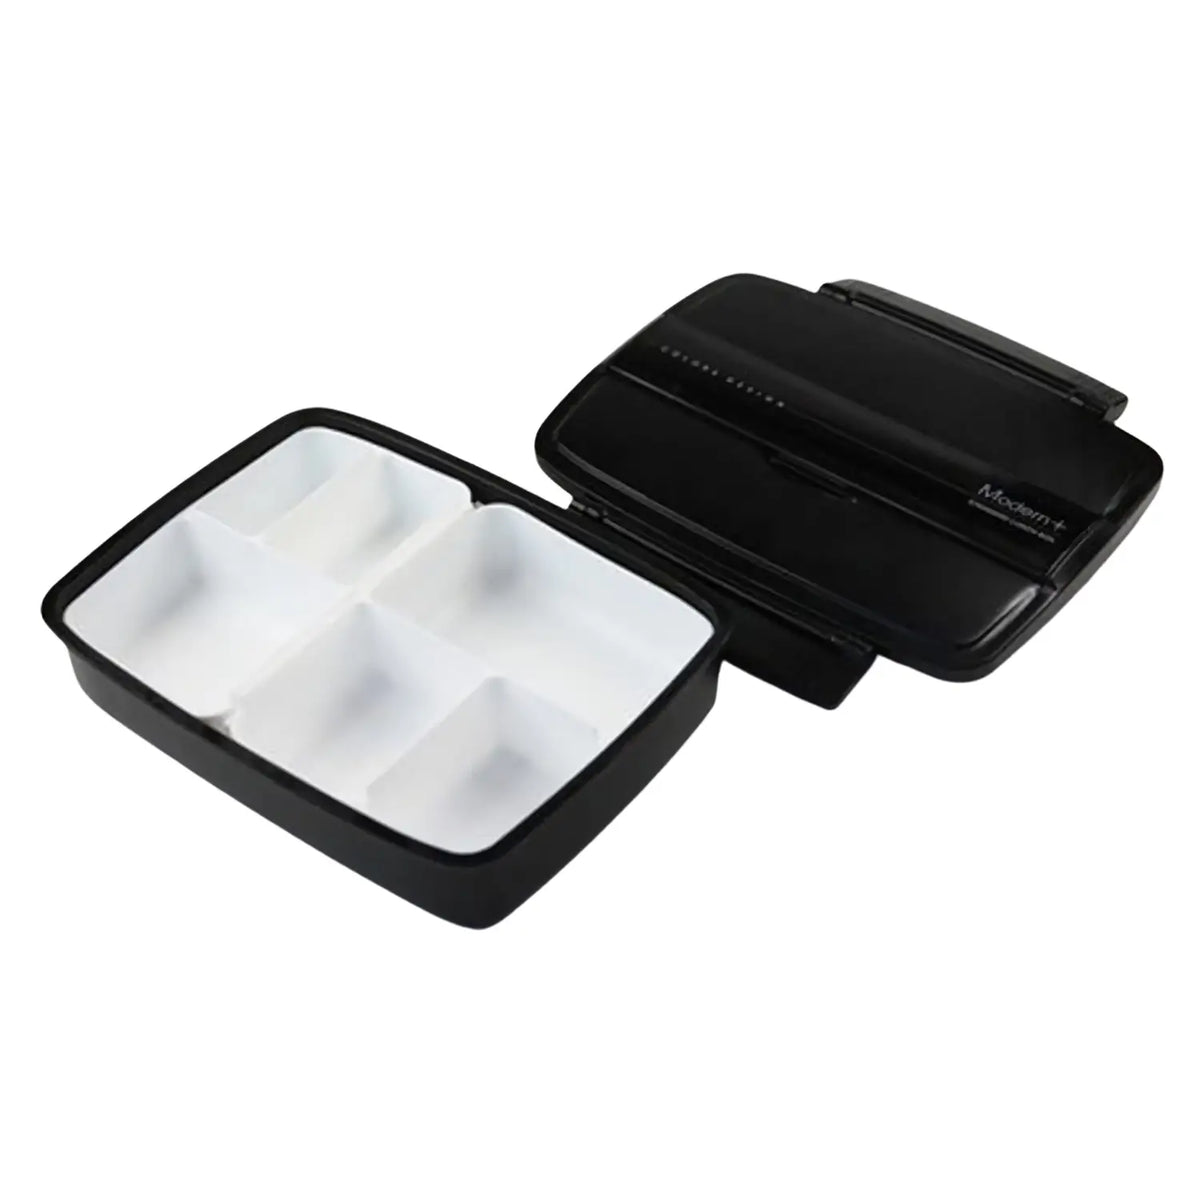 Disposable 4 Compartment Plastic Bento Lunch Box - Buy Disposable 4  Compartment Plastic Bento Lunch Box Product on